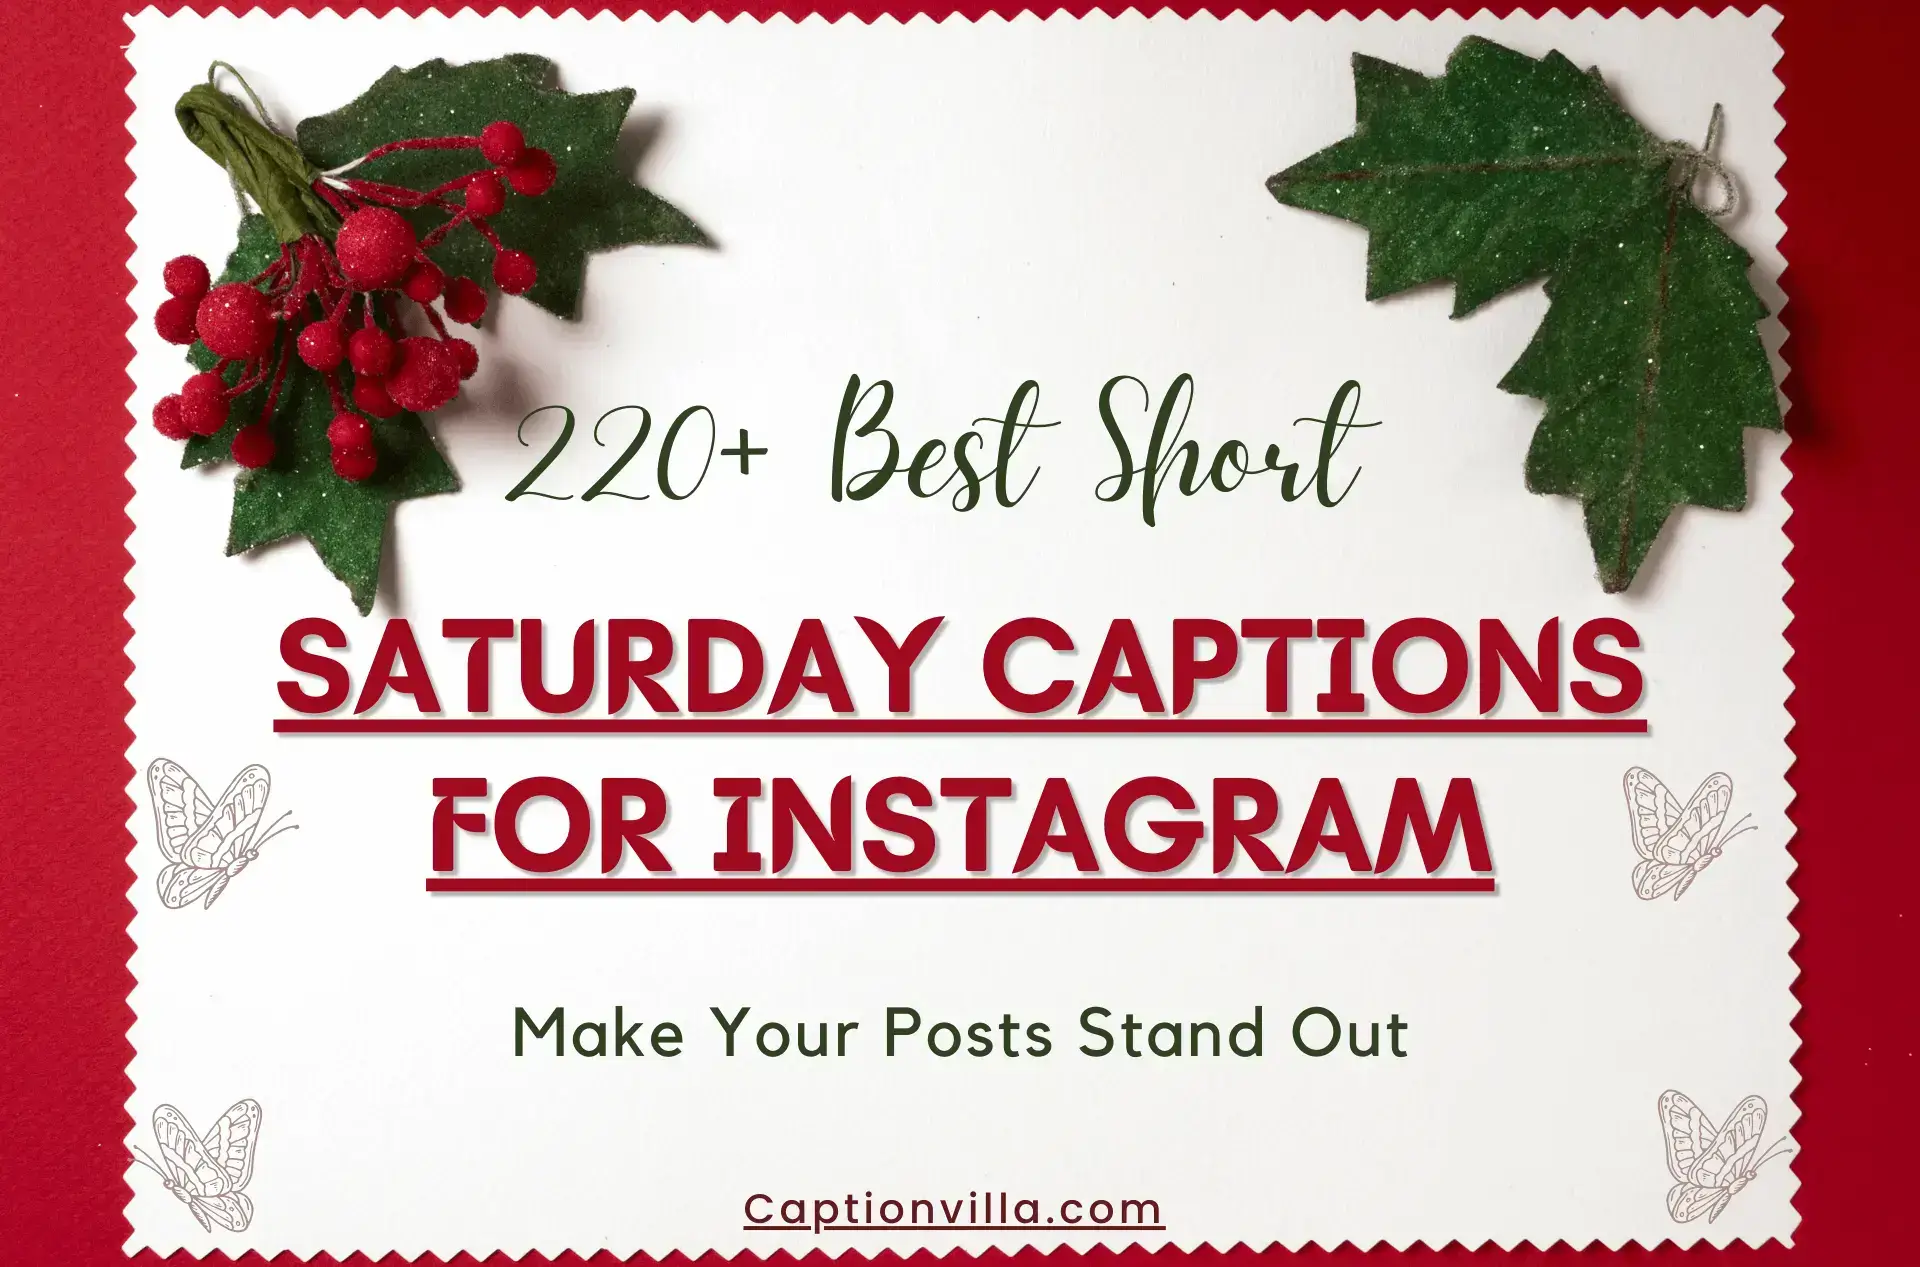 Beautiful background including the title of 220+ the best short Saturday Captions for Instagram